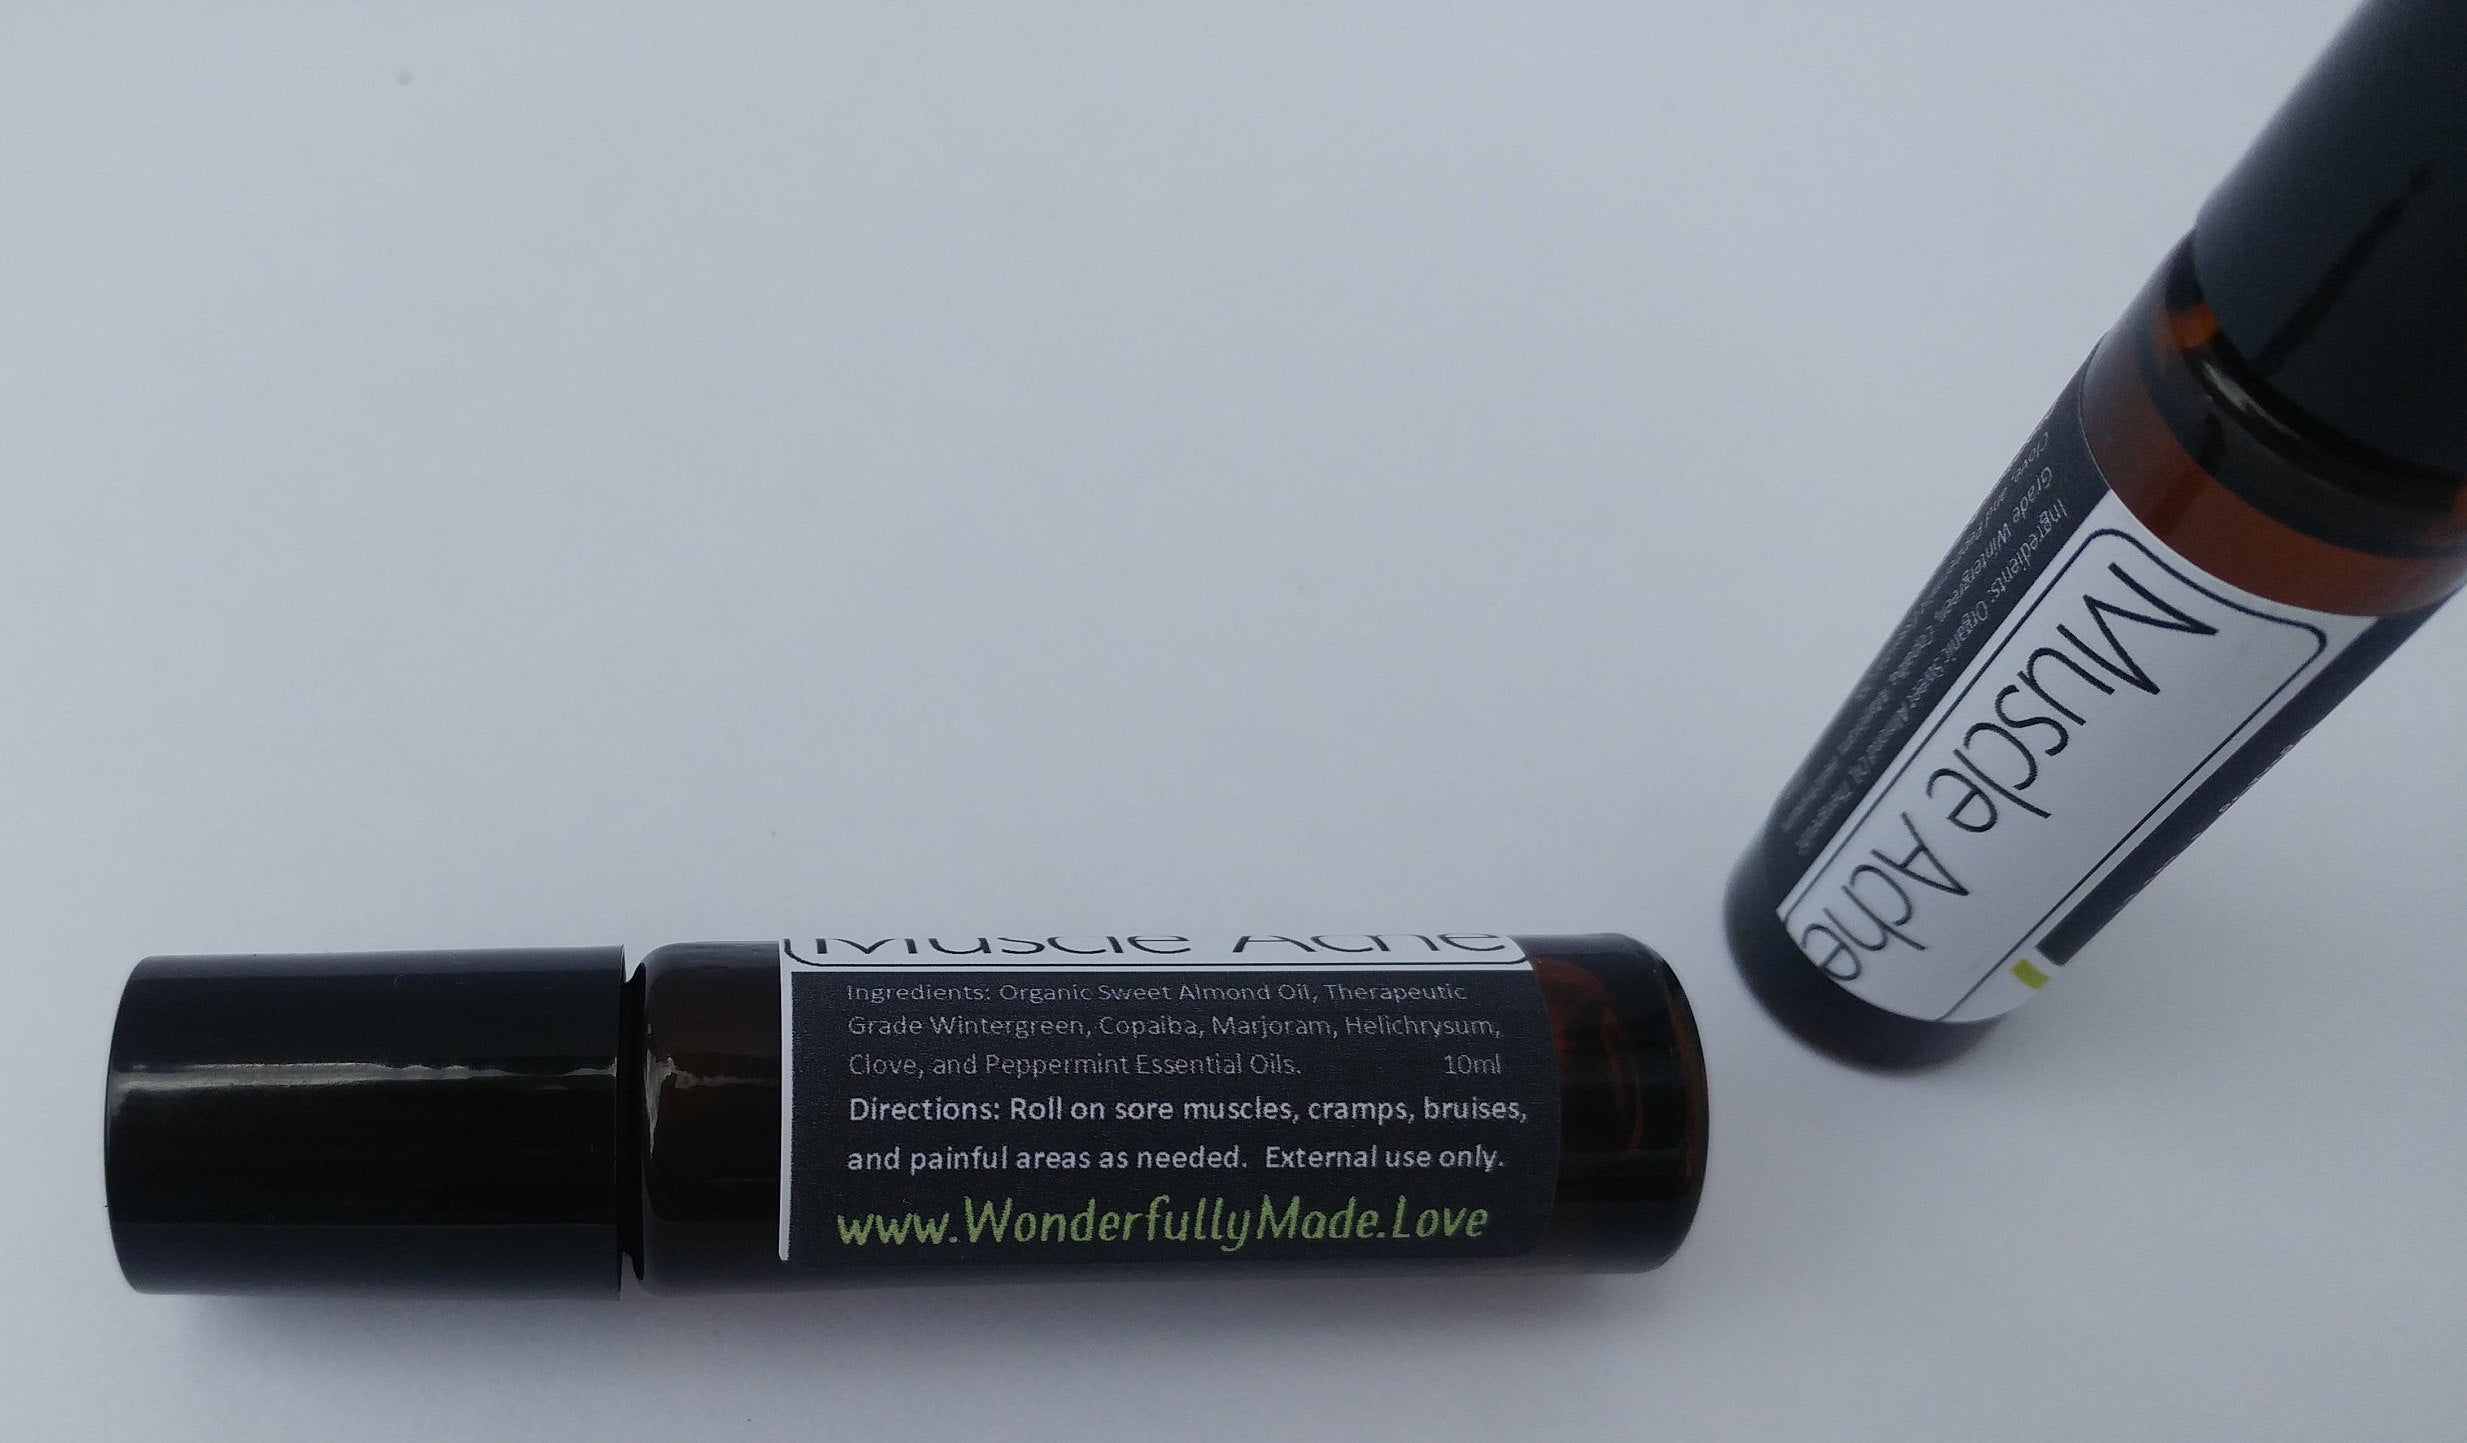 Sore Muscles & Pain Ease, Essential Oils